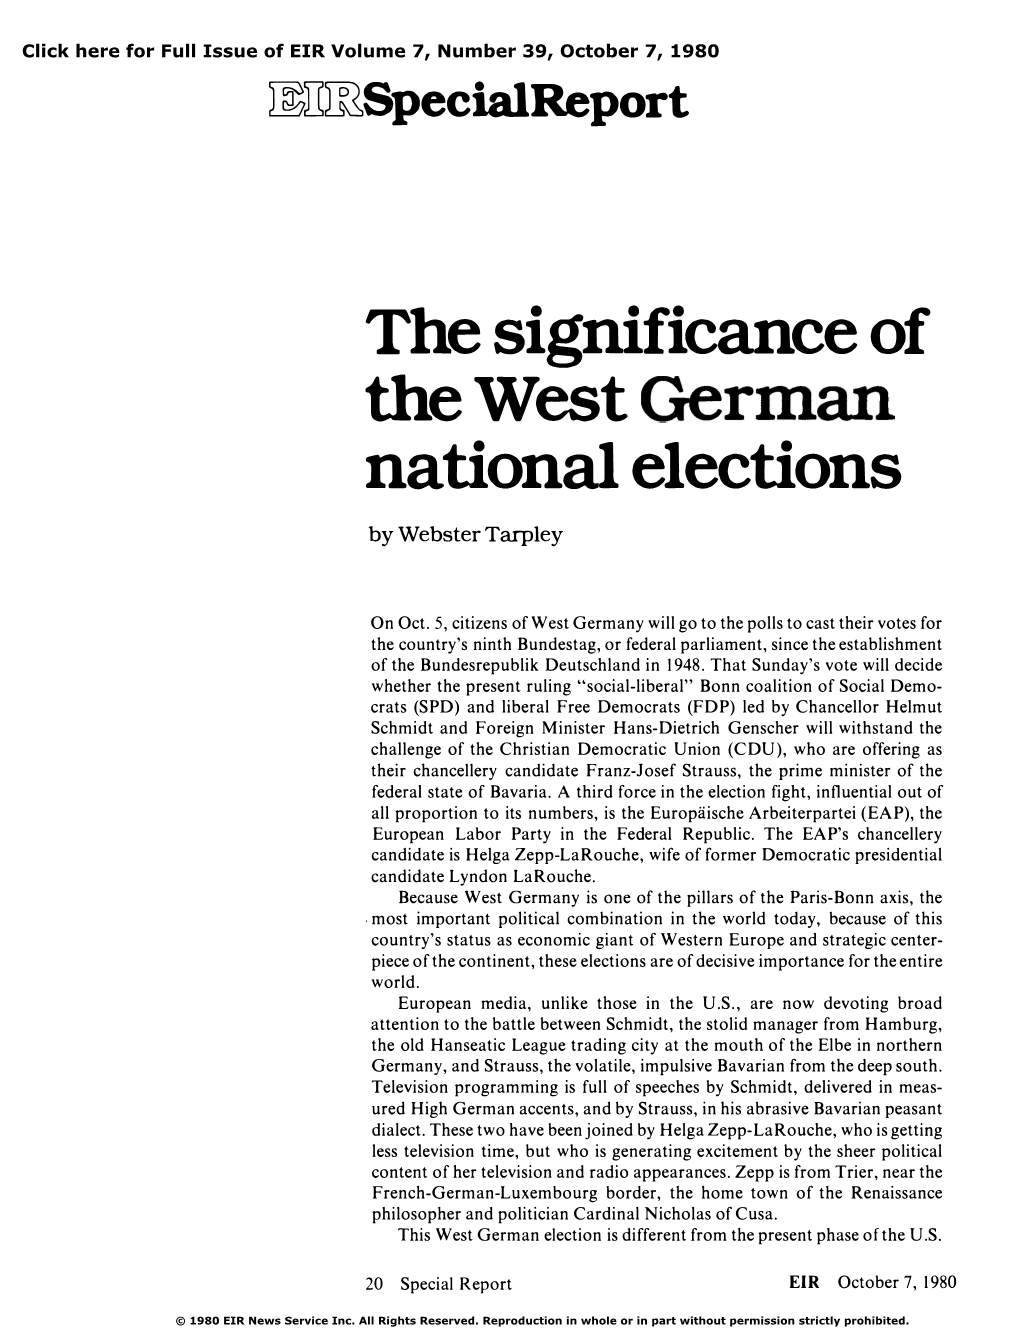 The Significance of the West German National Elections